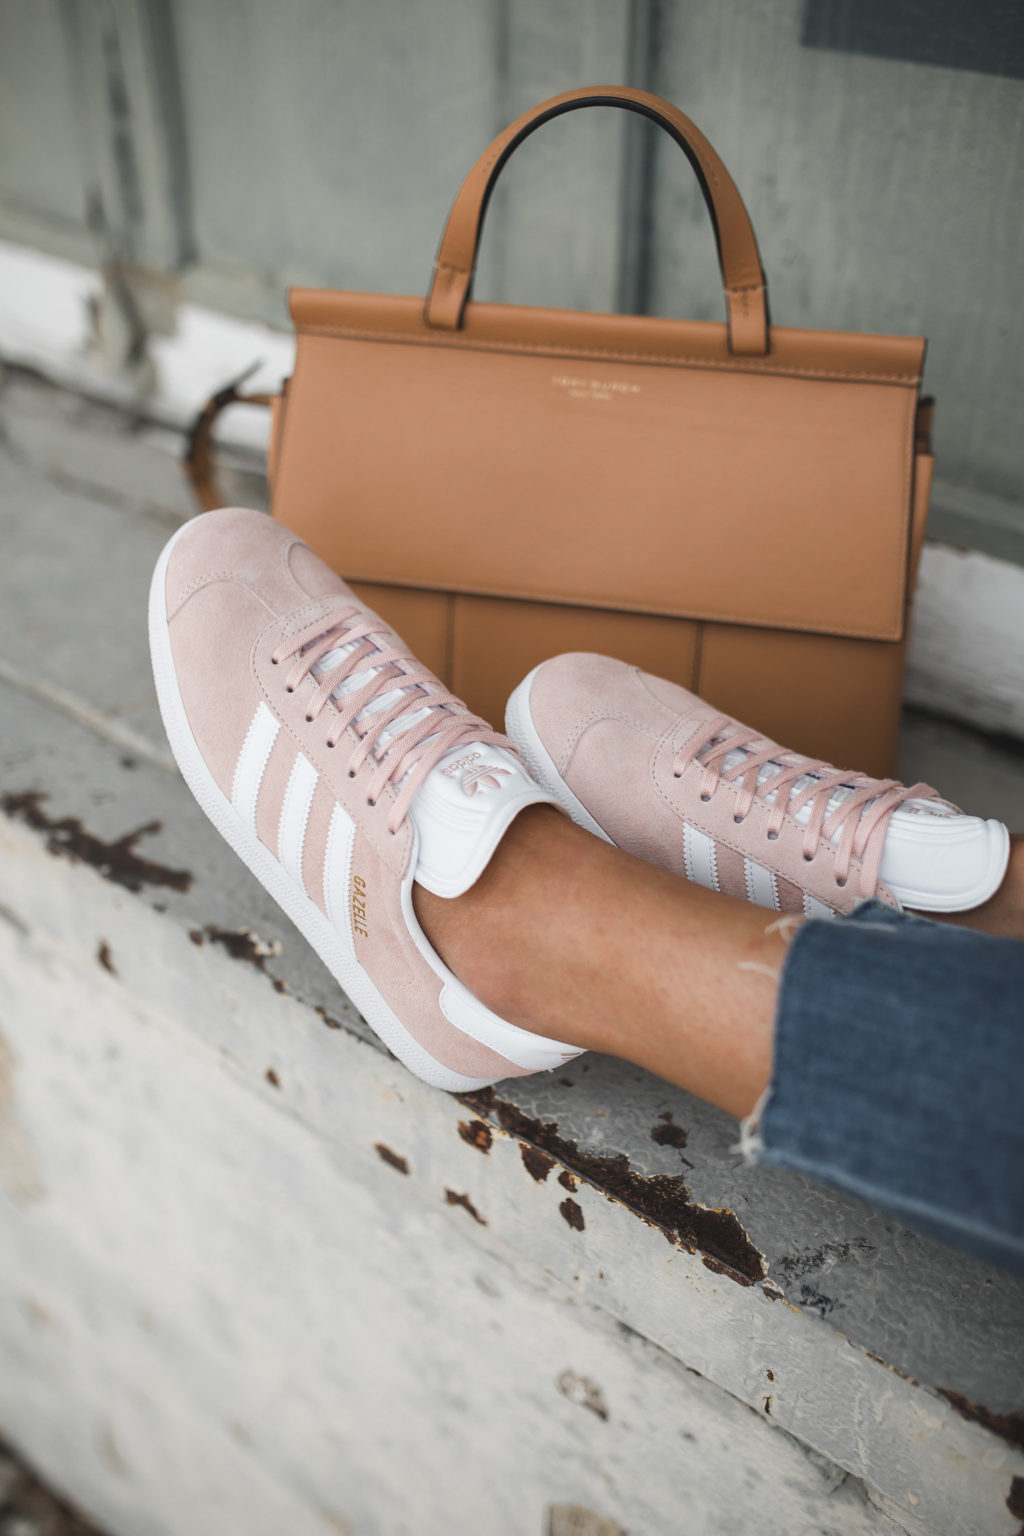 adidas gazelle pink outfit